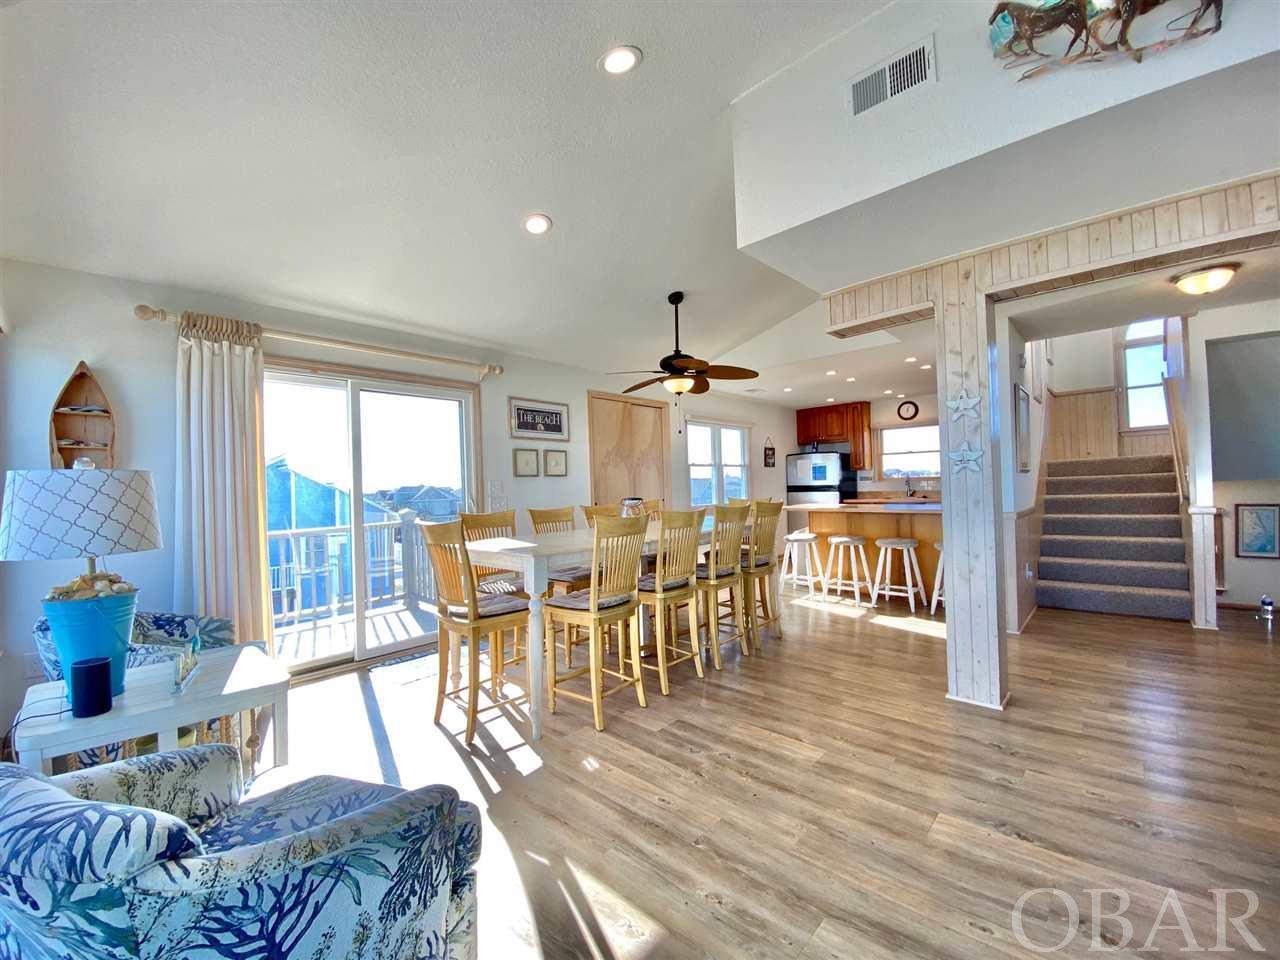 Corolla, North Carolina 27927, 6 Bedrooms Bedrooms, ,4 BathroomsBathrooms,Single family - detached,For sale,Topsail Arch,107773